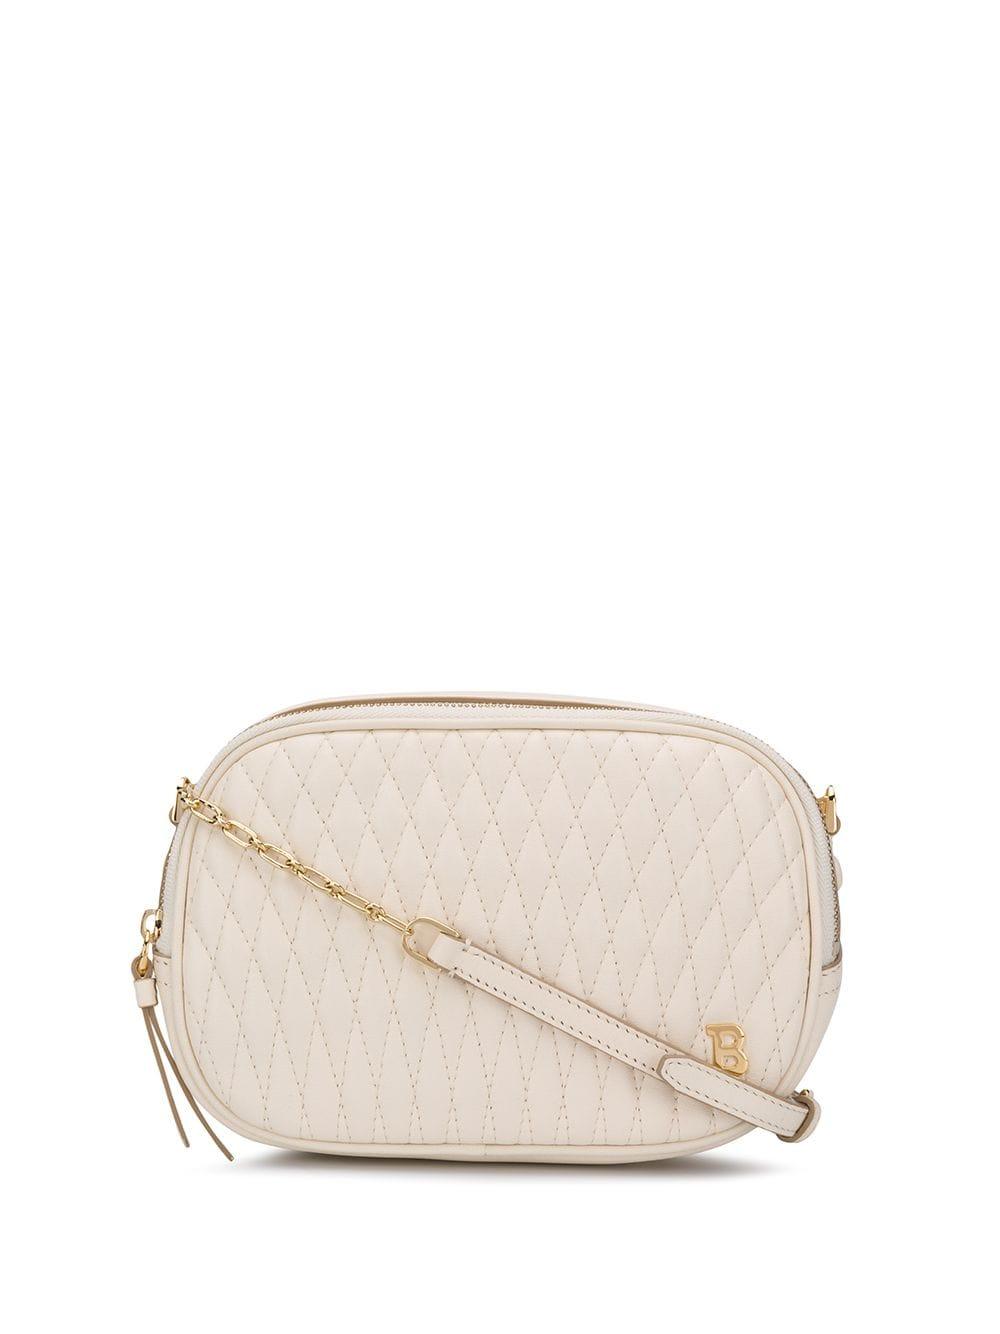 Bally Quilted Shoulder Bag in White - Lyst